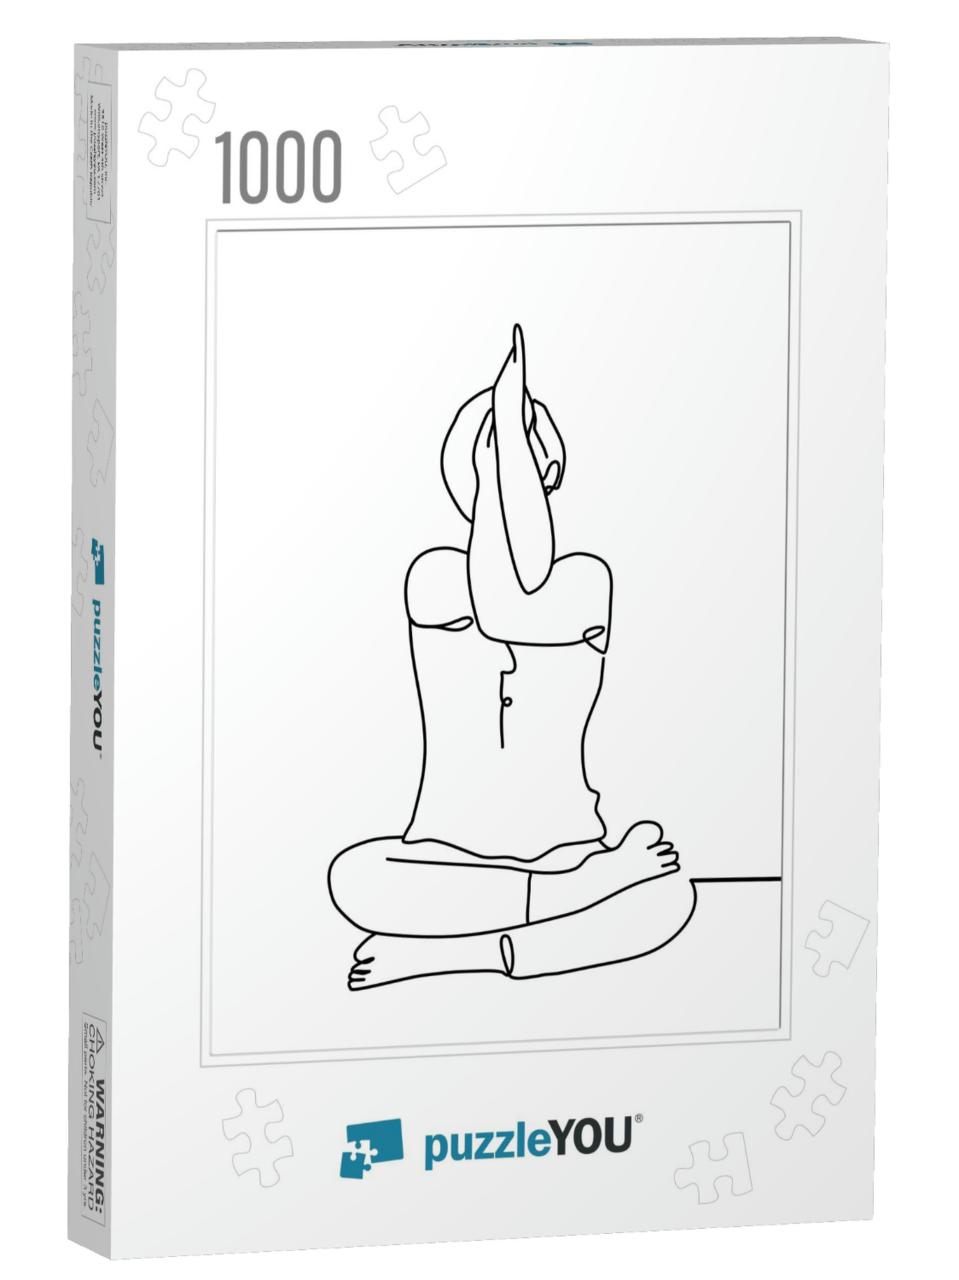 One Continuous Line Drawing, Exercise Time for Yoga... Jigsaw Puzzle with 1000 pieces